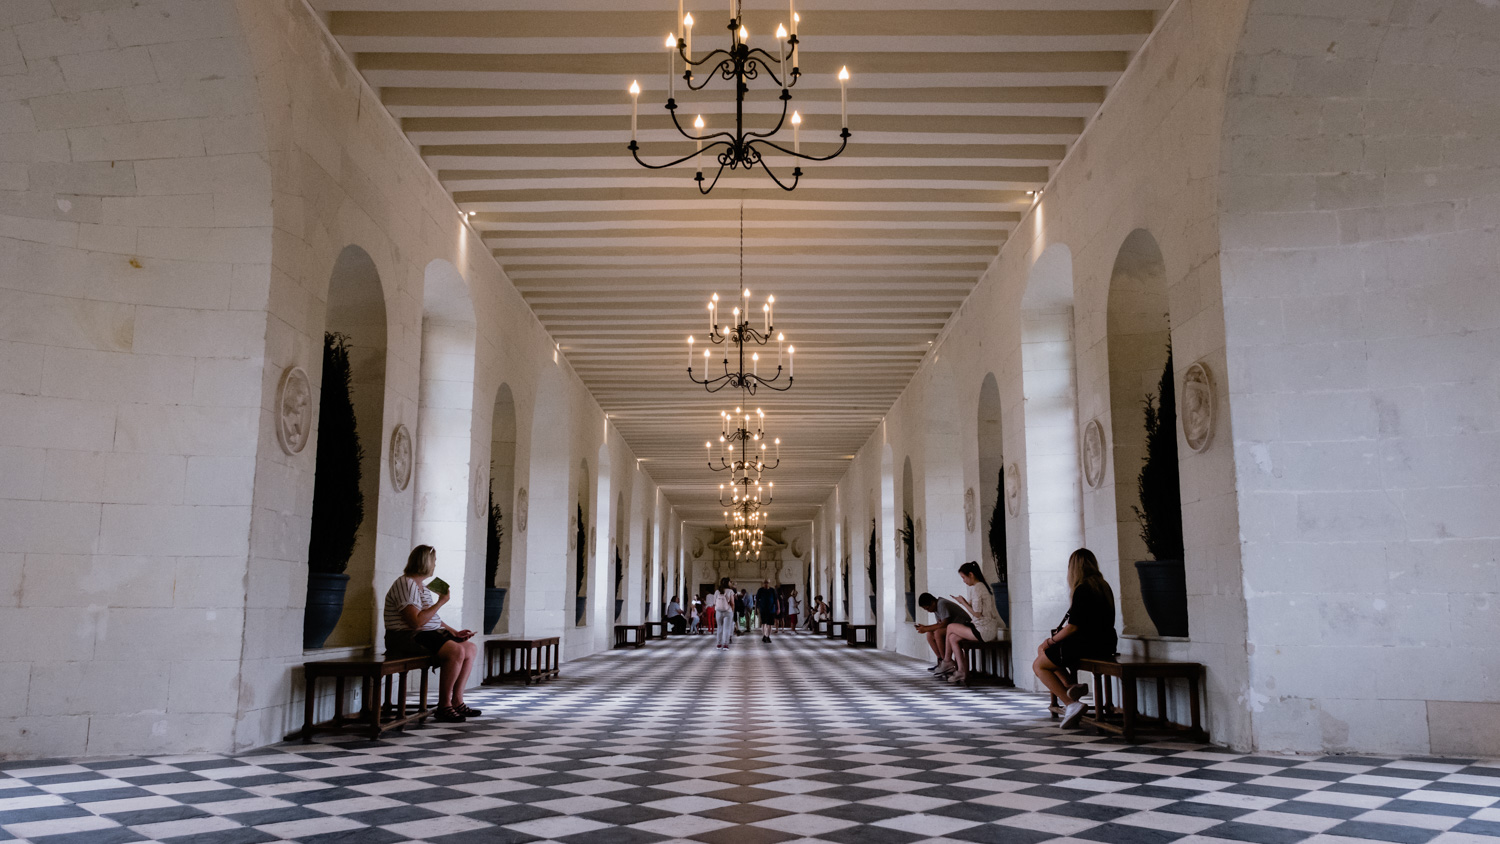 Interior halls of The Château de Chenonceau - Travel photography and guide by © Natasha Lequepeys for "And Then I Met Yoko". #loirevalley #france #travelguide #travelphotography #valdeloire 